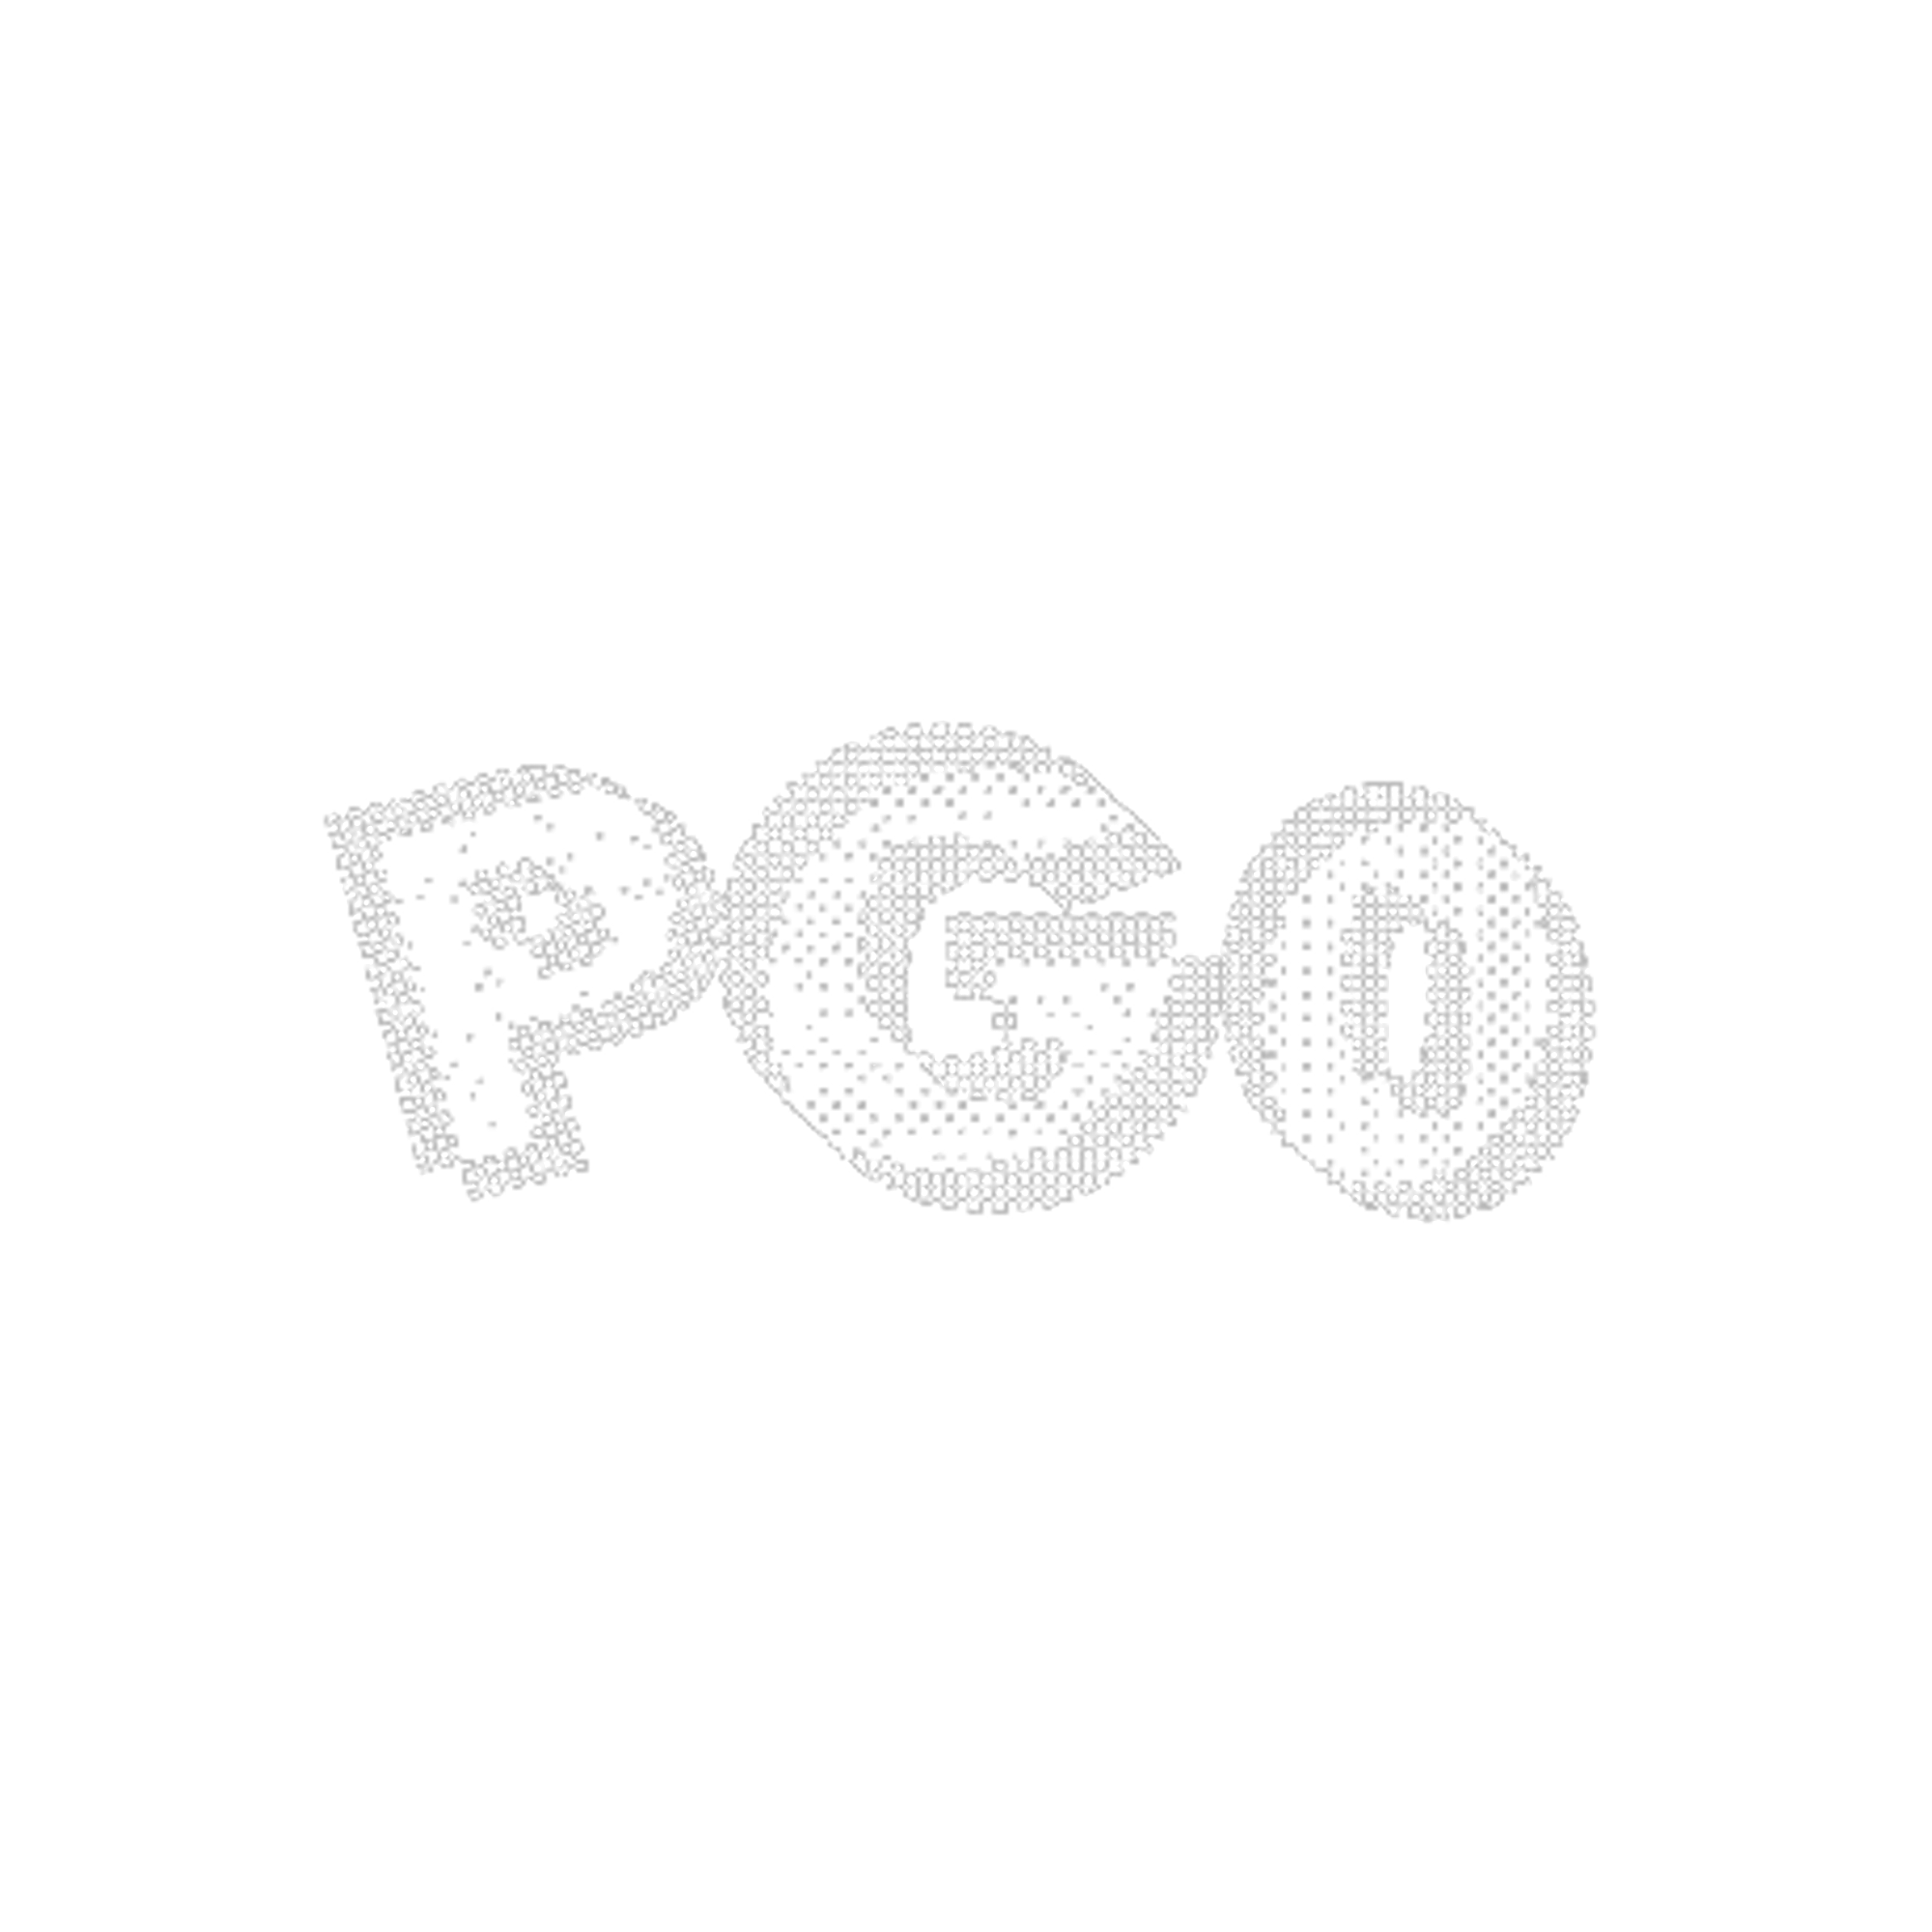 ppg00 - Overview